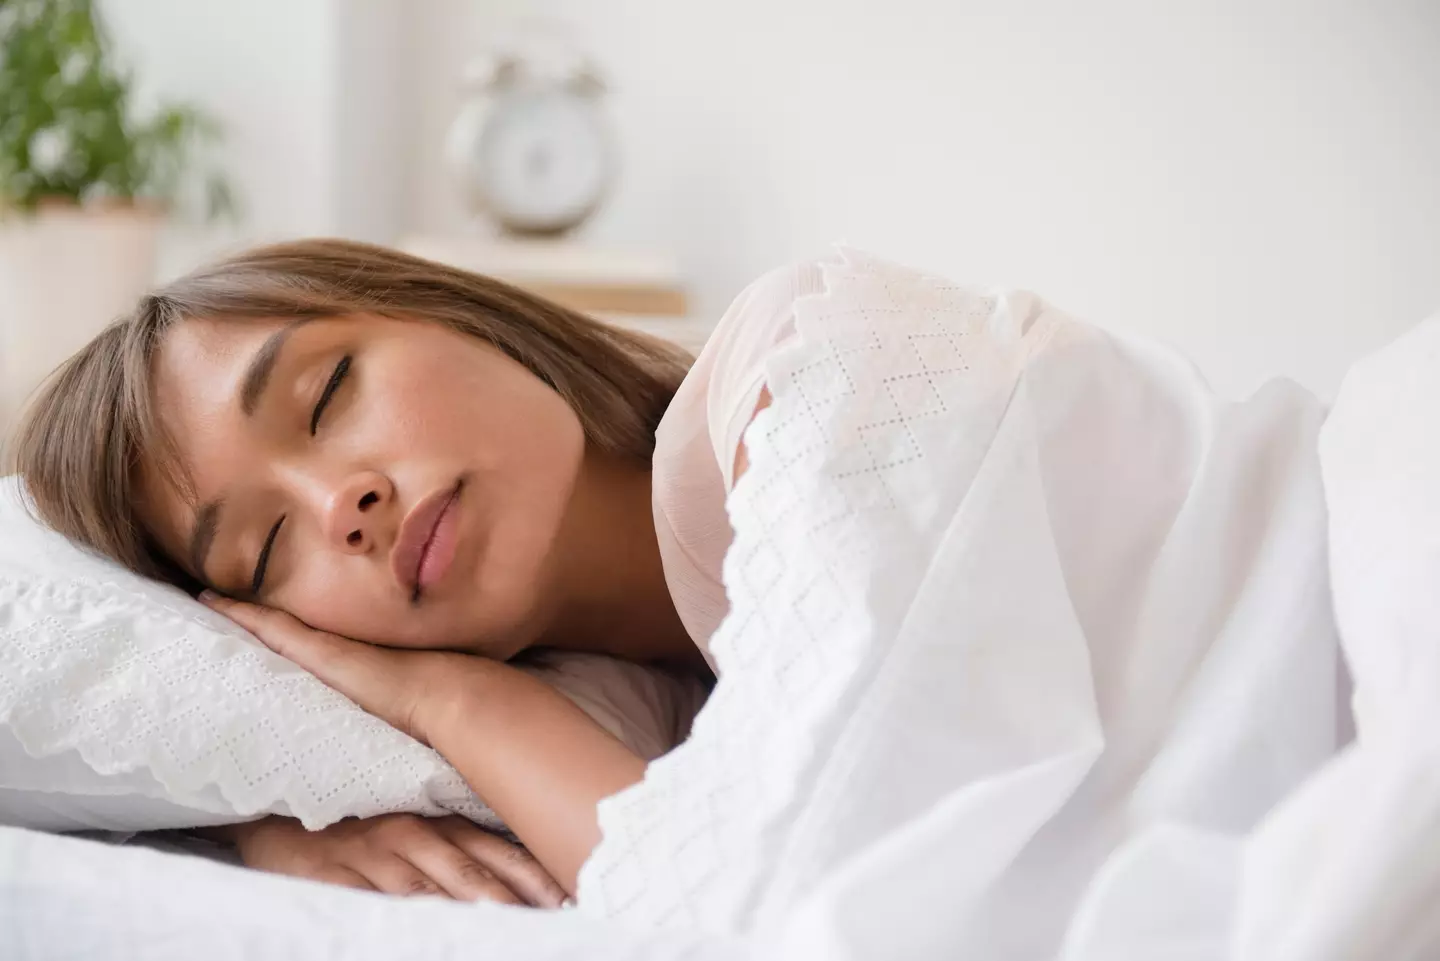 Poor sleep can lead to health problems, so it's important we have a good night's kip.